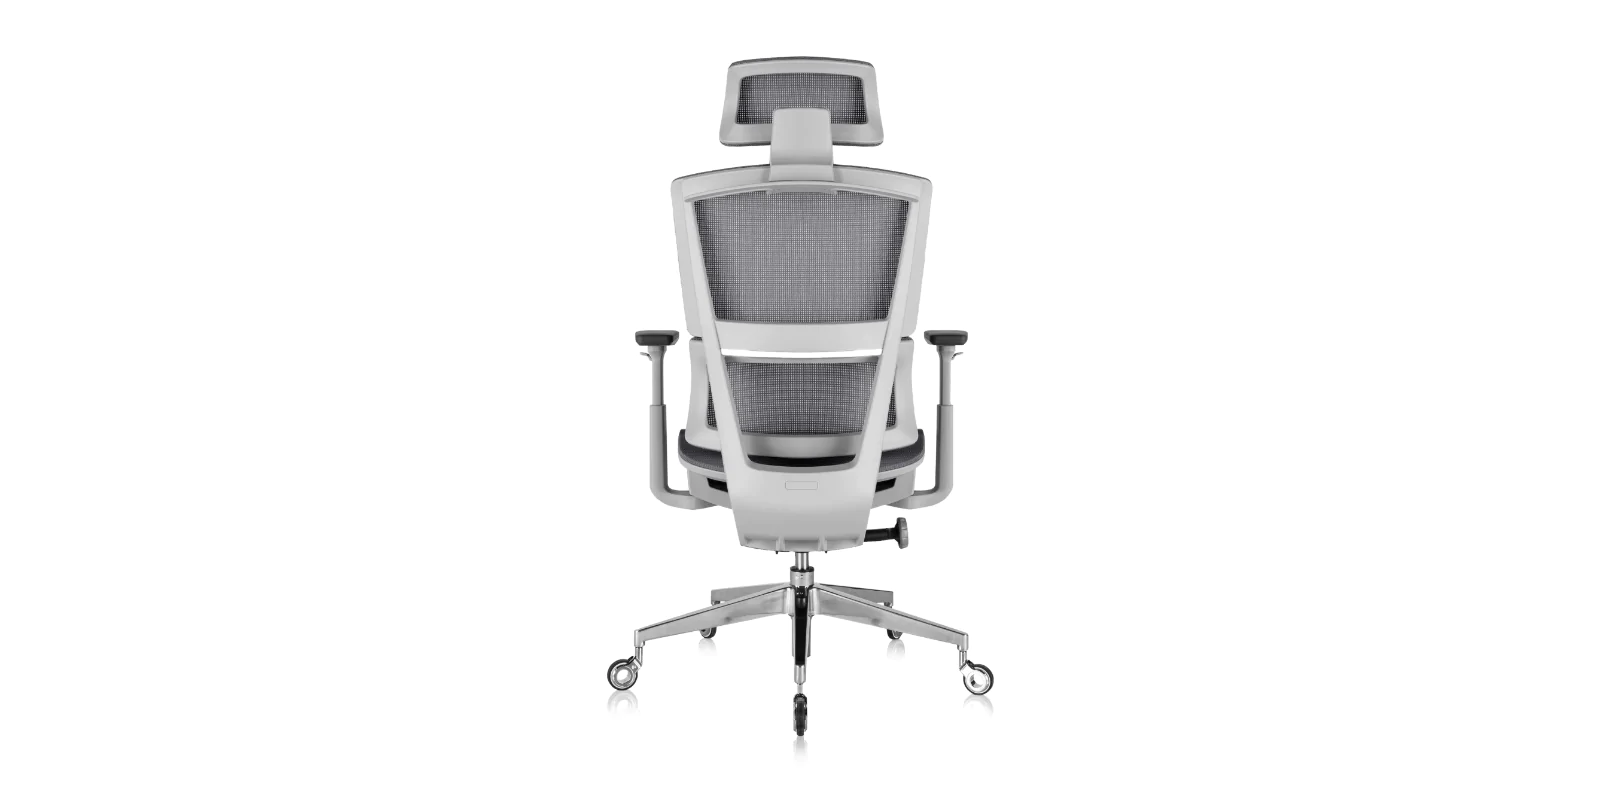 Best office chair position for posture